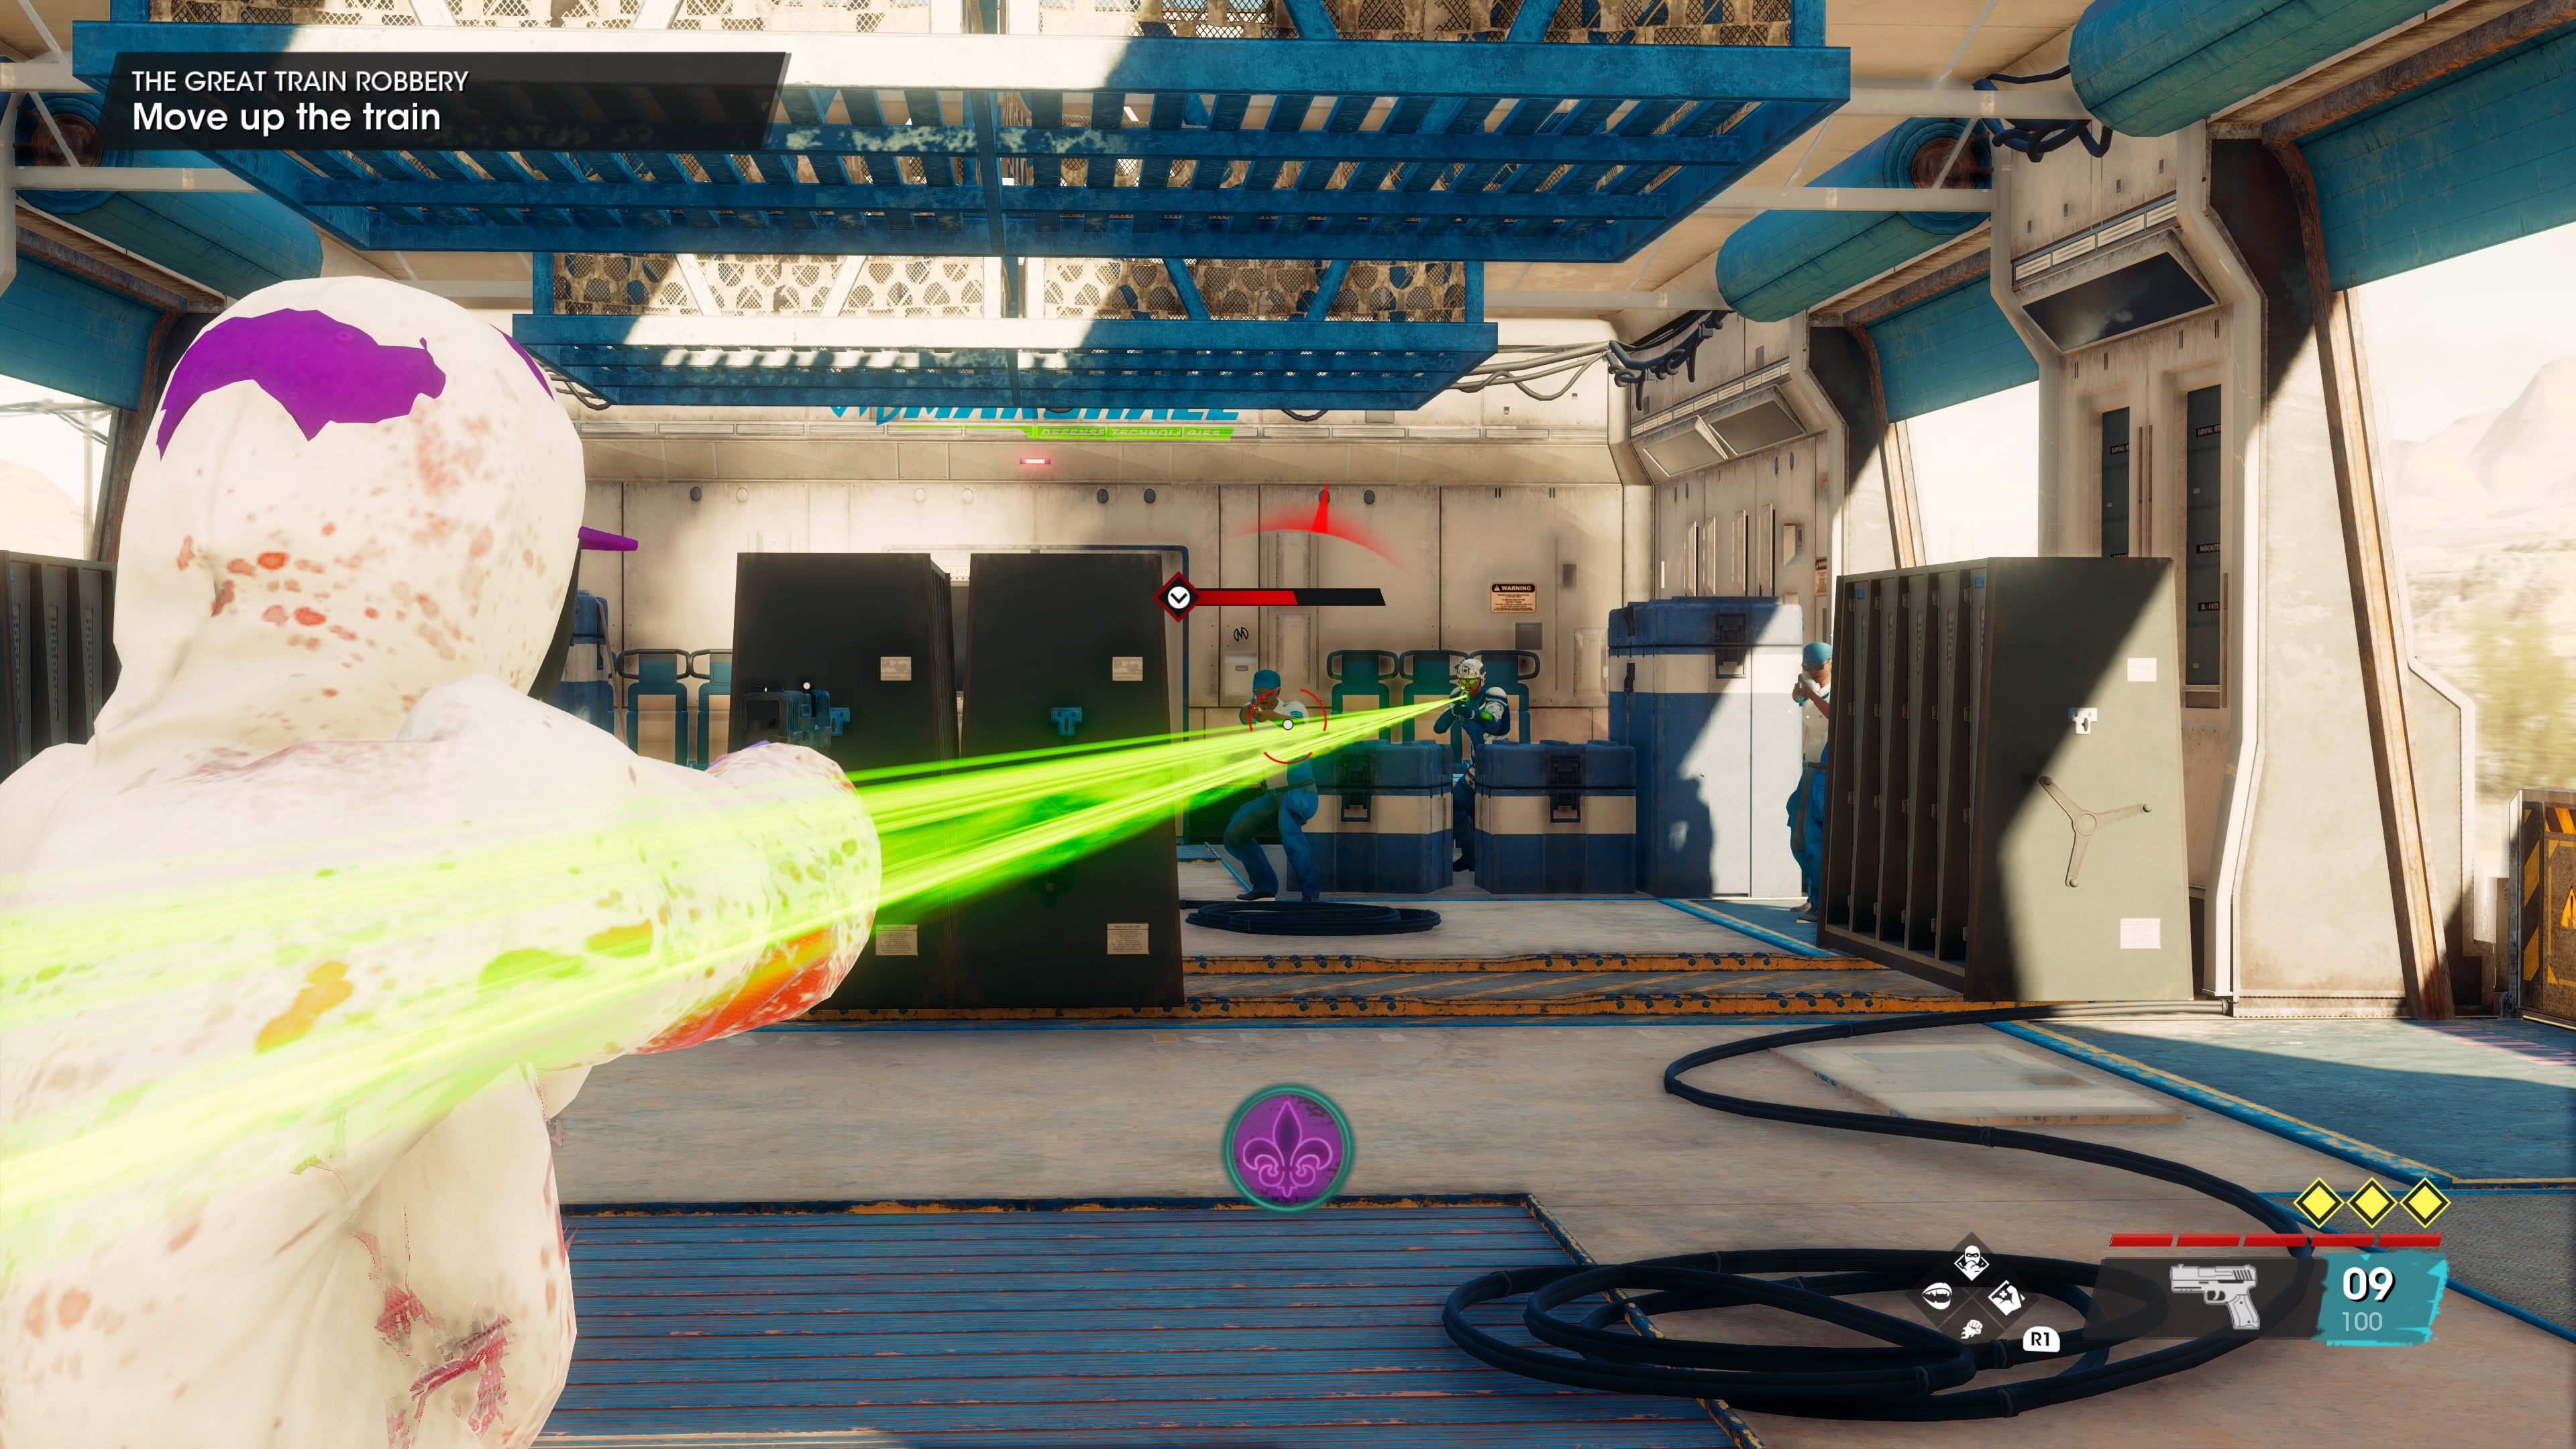 Saints Row review - over the shoulder fight inside a train, get shot with a green laser